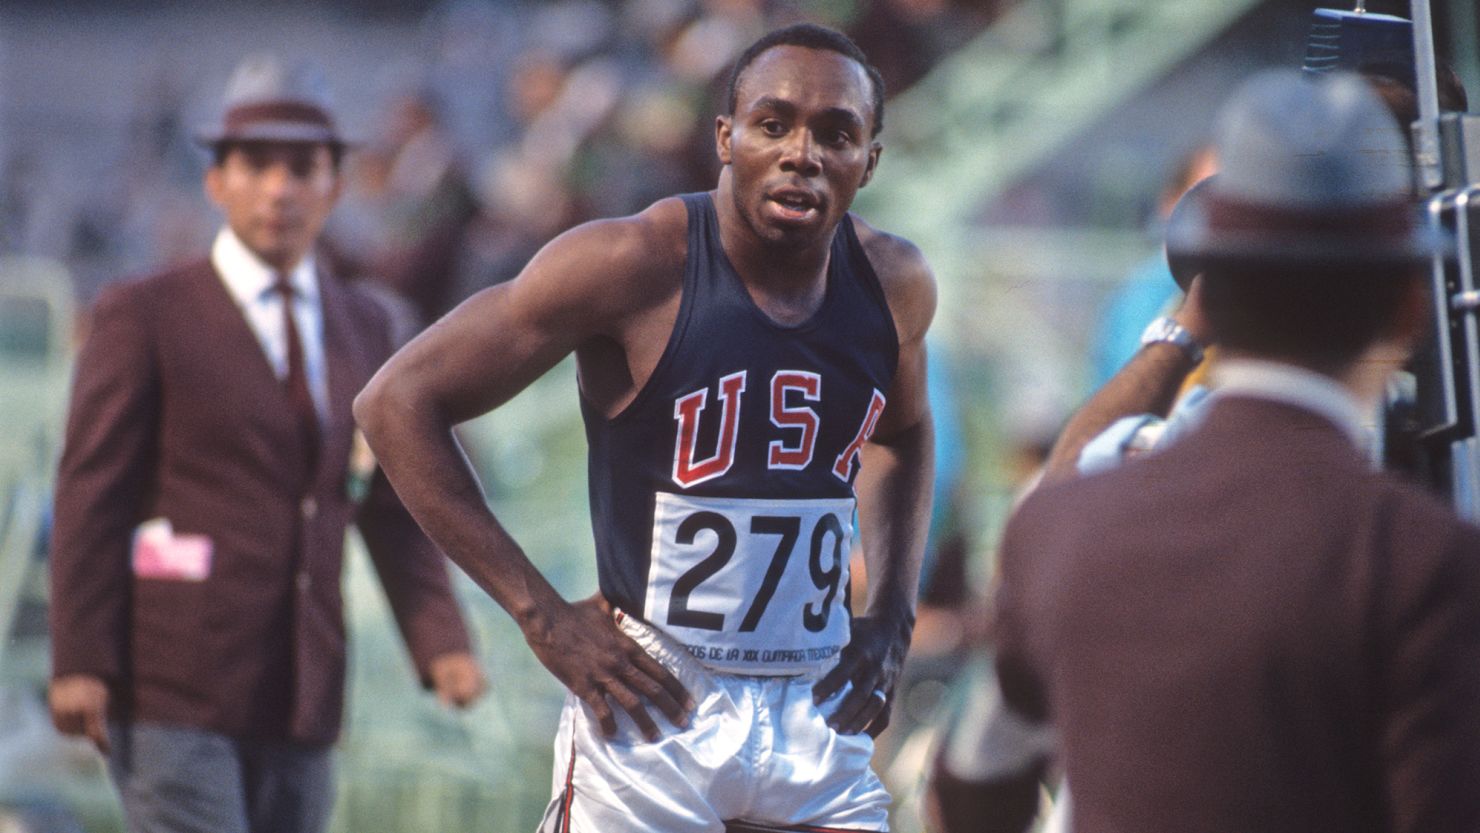 Jim Hines became the first man to run the 100m in under 10 seconds. 